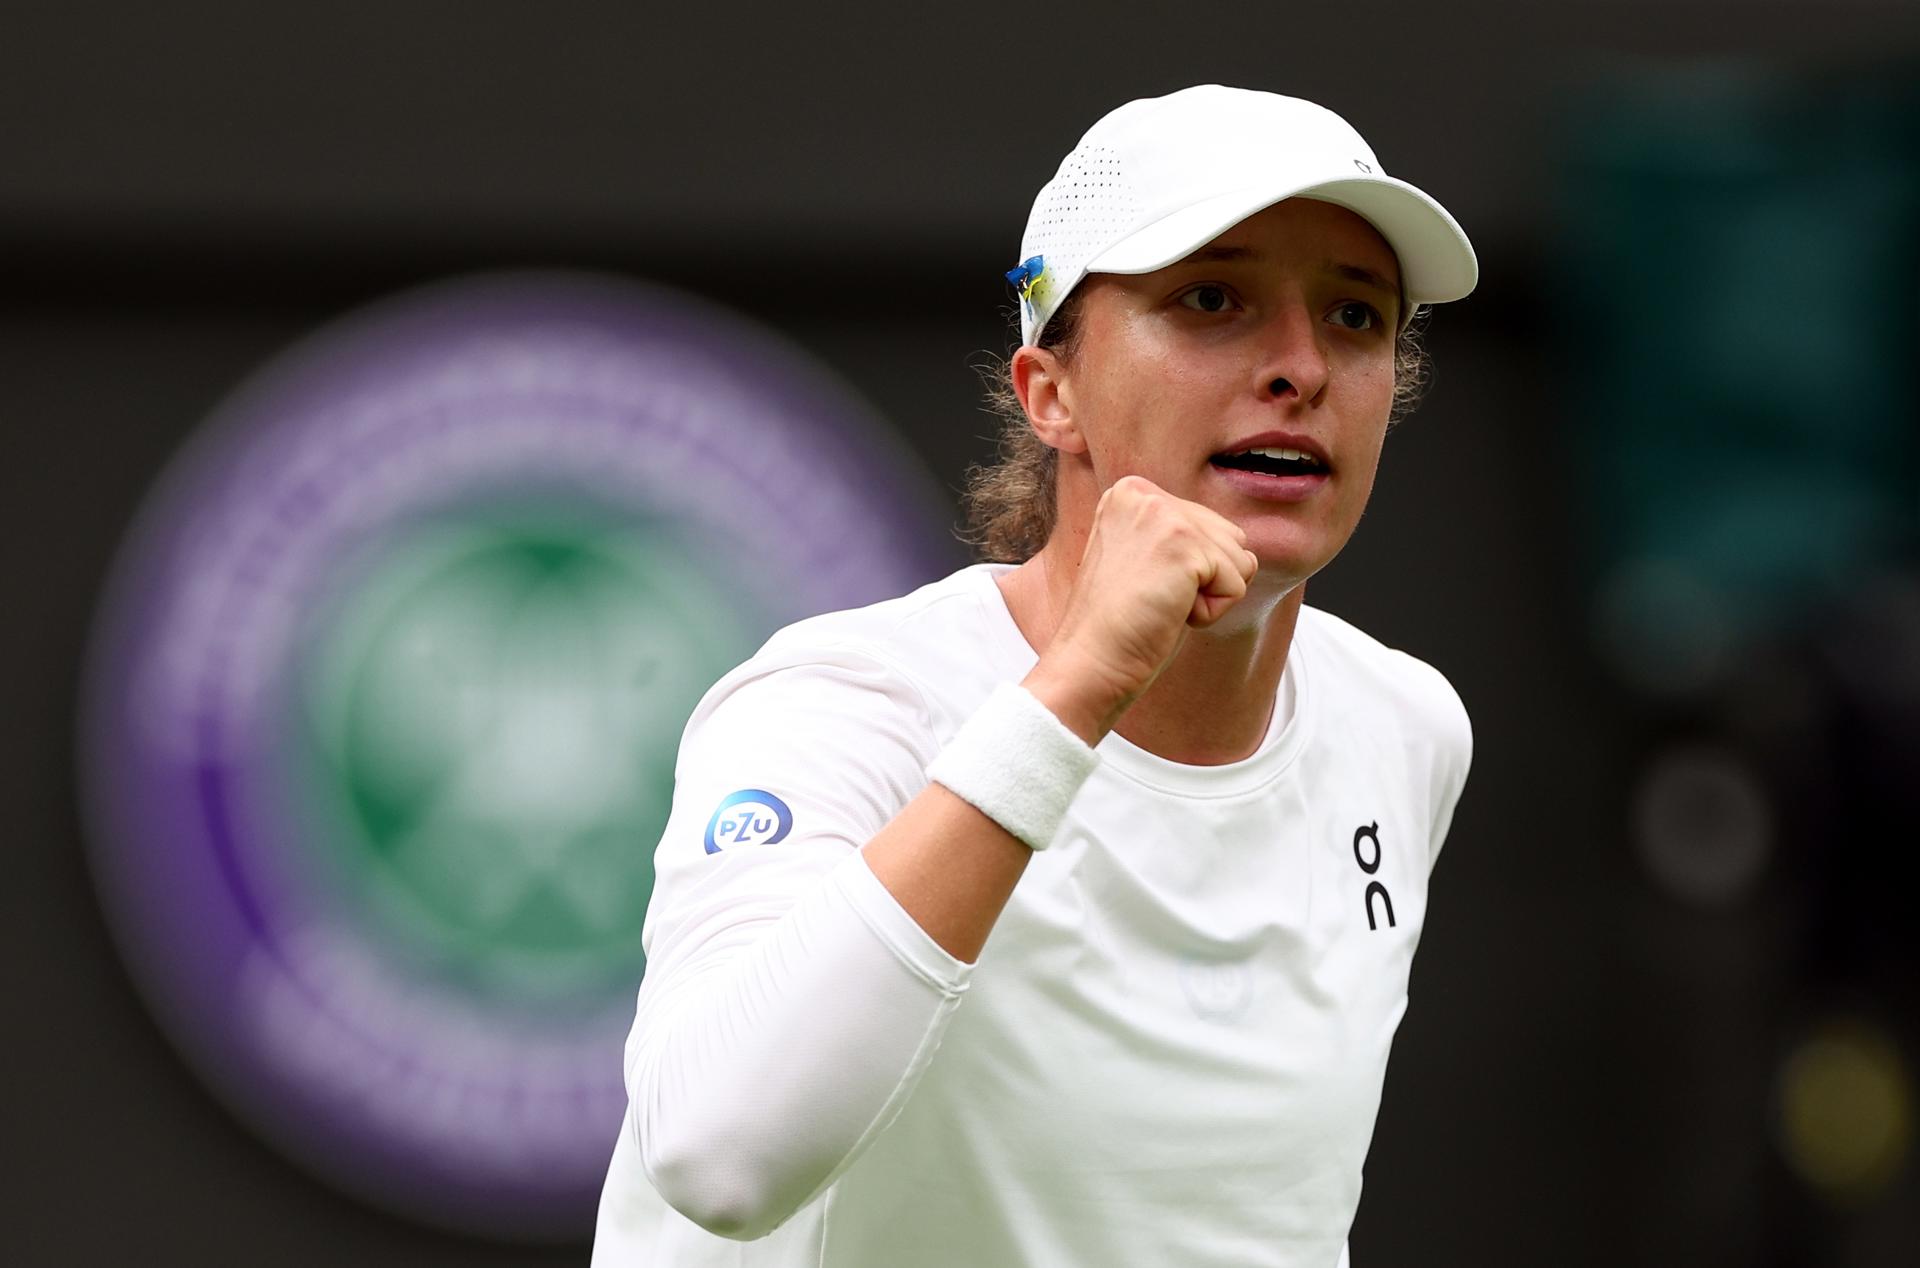 Iga Swiatek of Poland celebrates after defeating Lin Zhu of China 6-1, 6-3 in first-round action at the Wimbledon Championships, Wimbledon, Britain, 3 July 2023. EFE/EPA/ADAM VAUGHAN/EDITORIAL USE ONLY